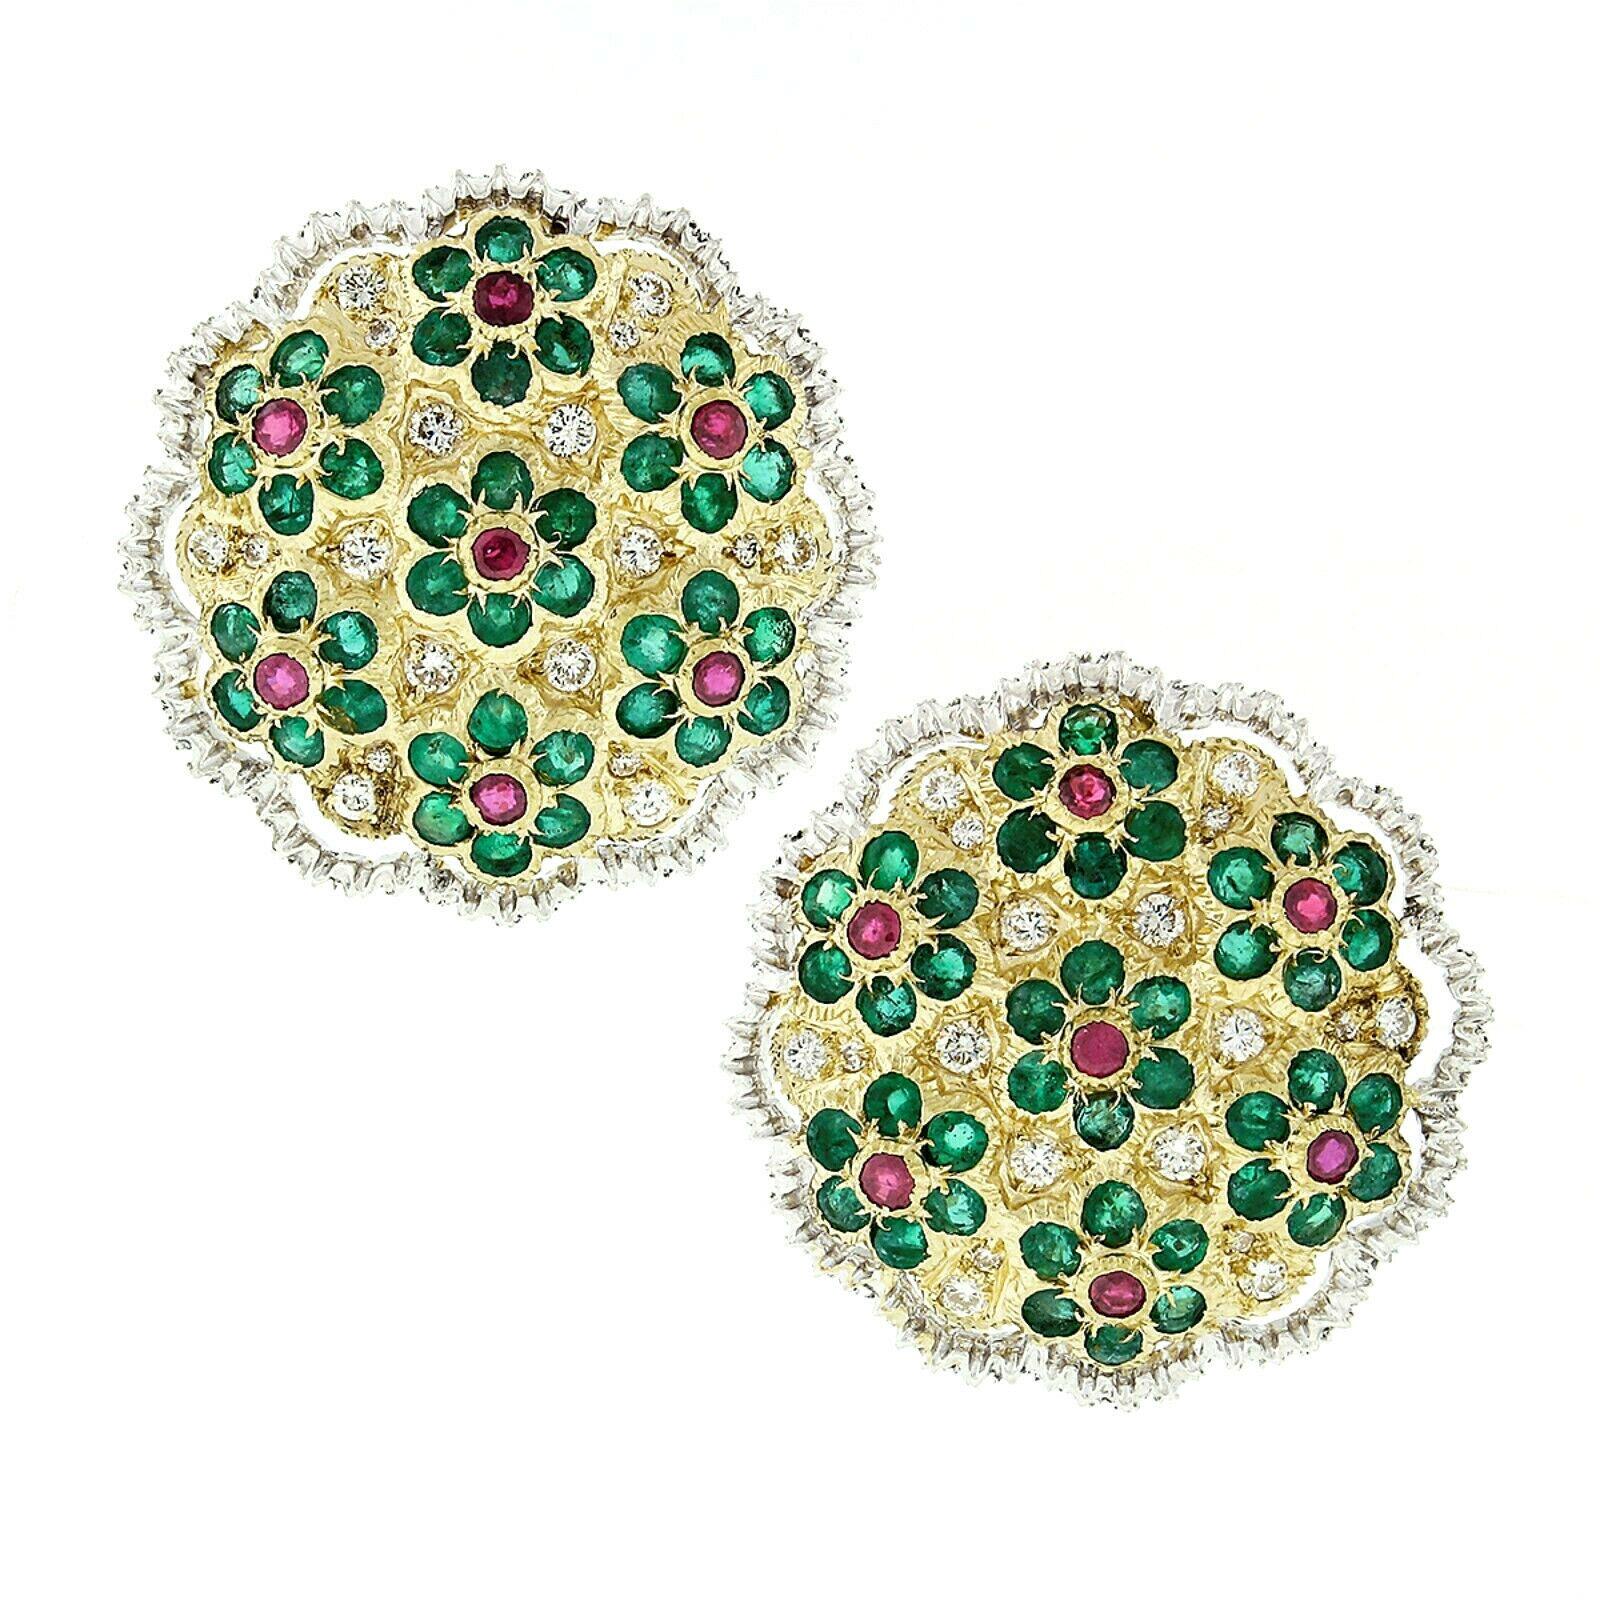 Here we have a truly breathtaking pair of large and colorful button earrings crafted in solid 18k gold featuring numerous daisy flowers, set with the finest quality natural emeralds, rubies and diamonds throughout. Each daisy flower consist of a